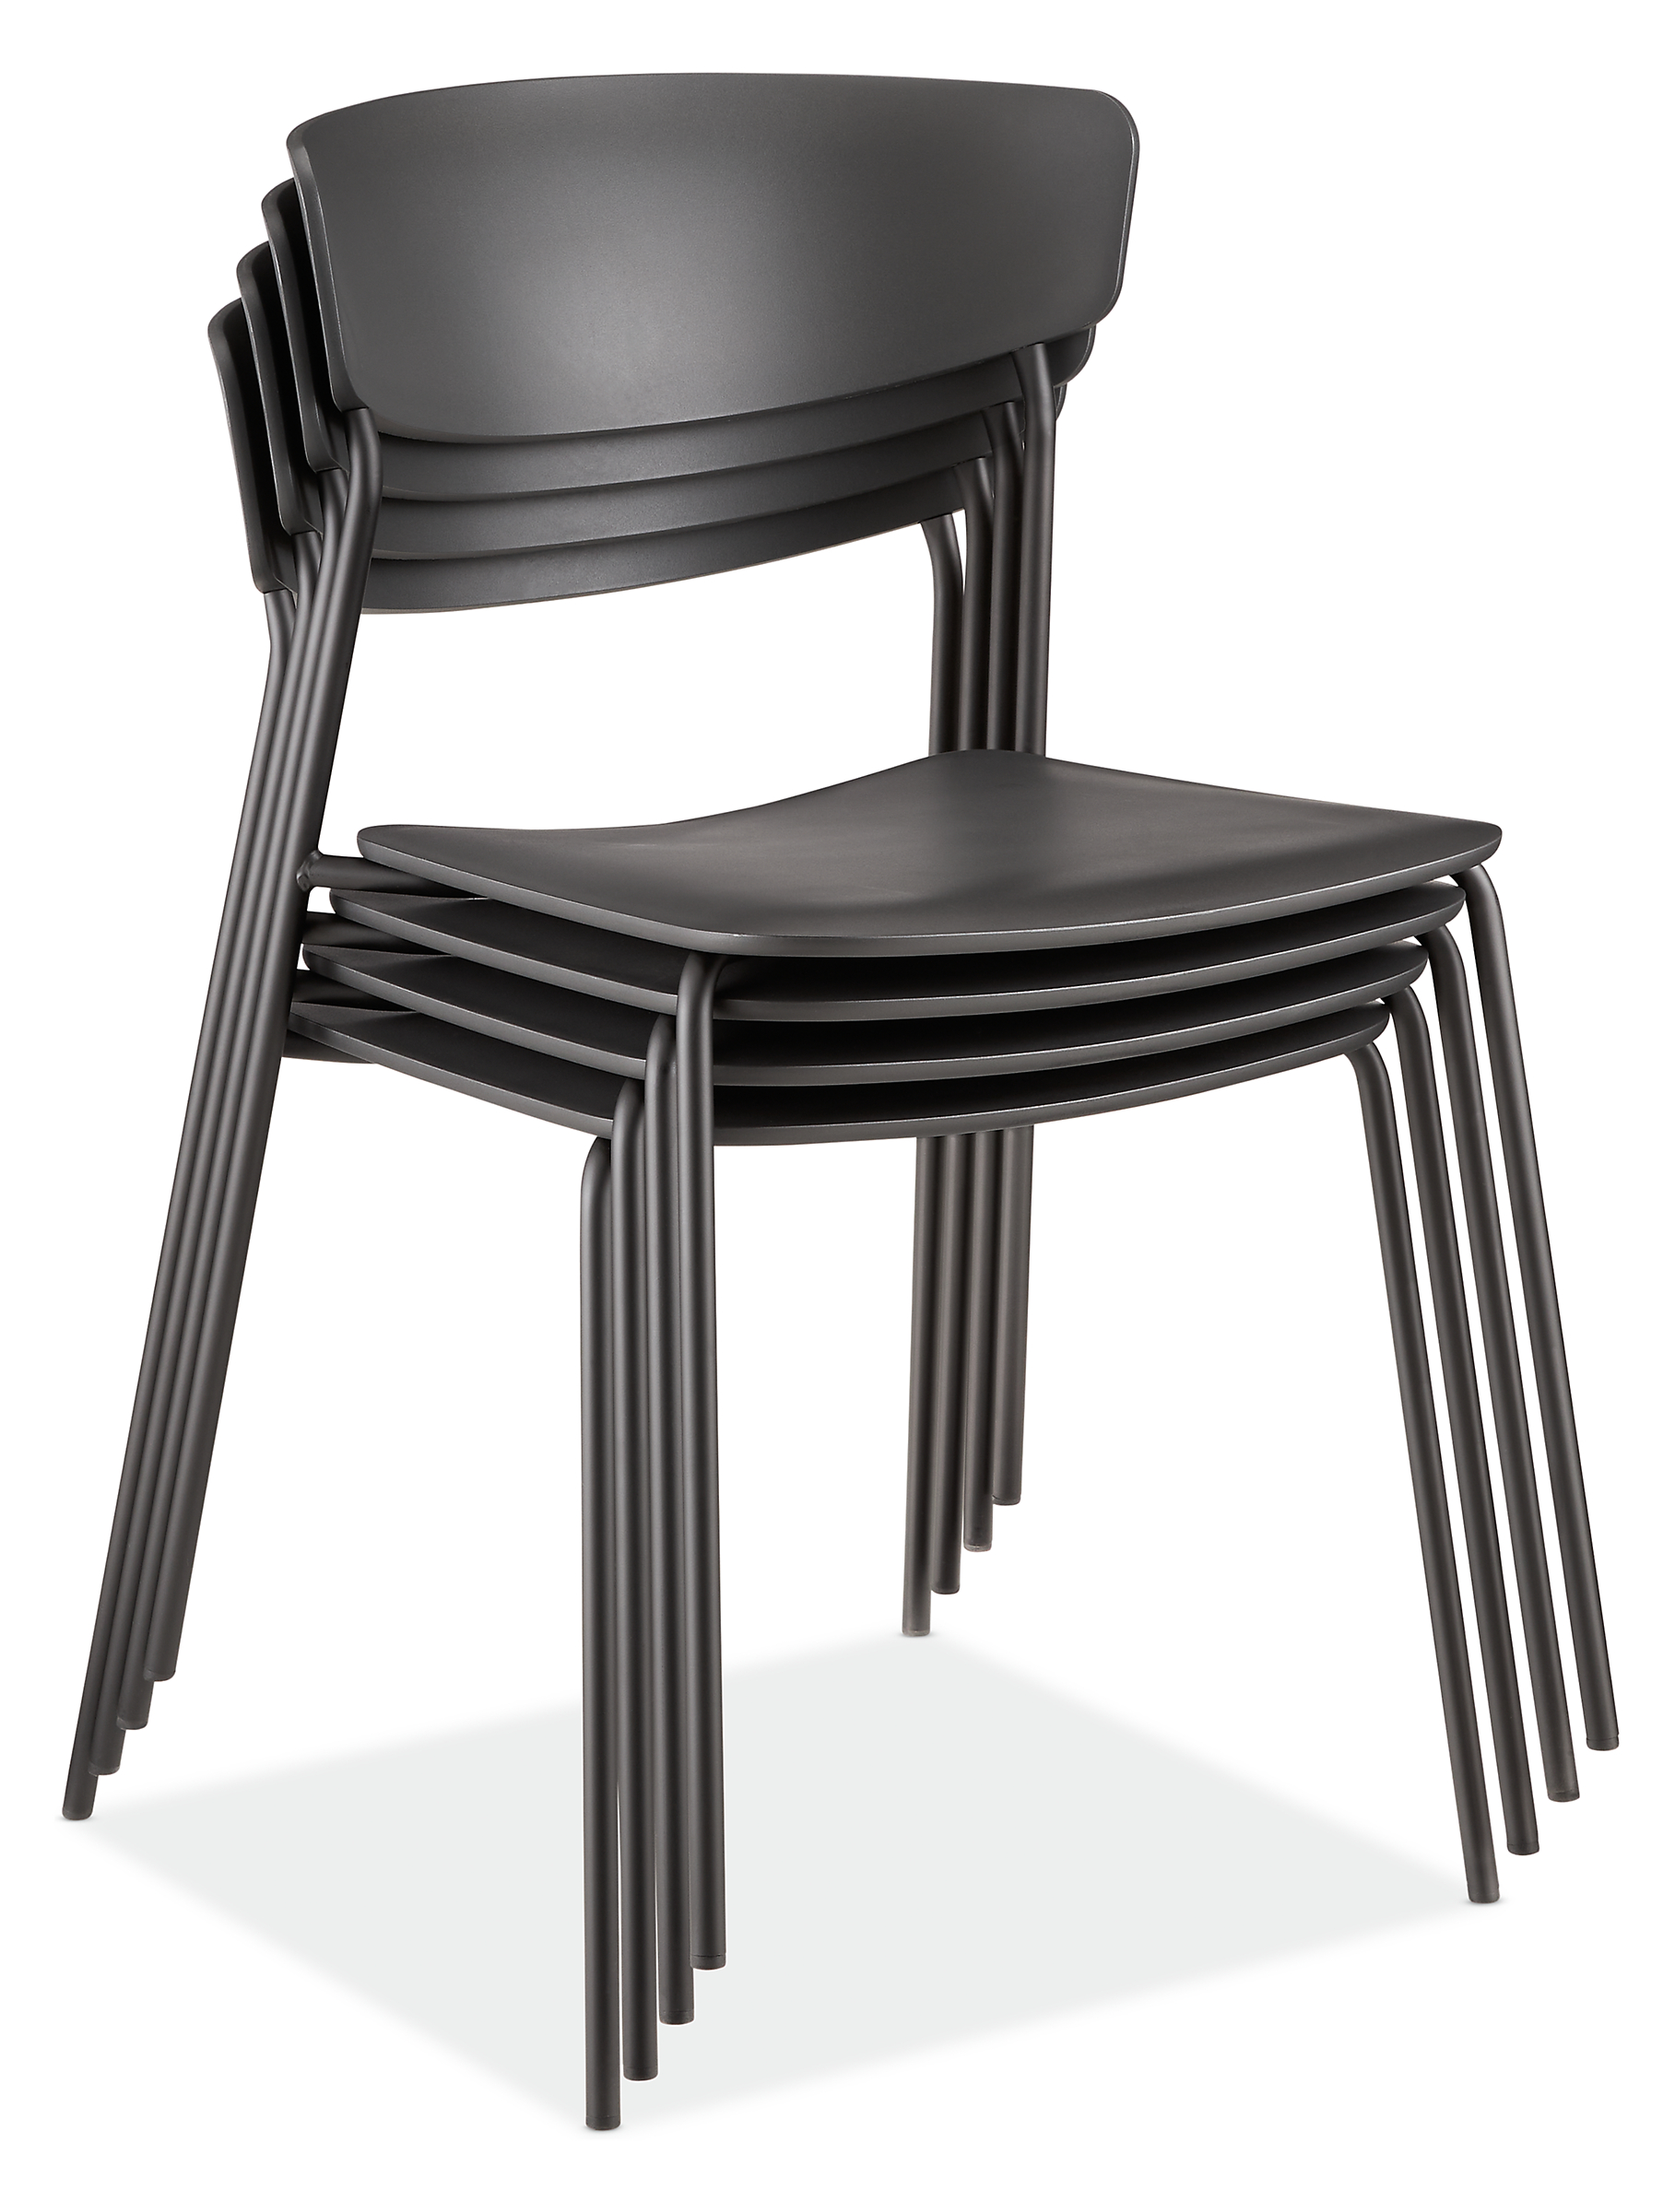 detail of 4 stacked wolfgang outdoor side chairs in black.